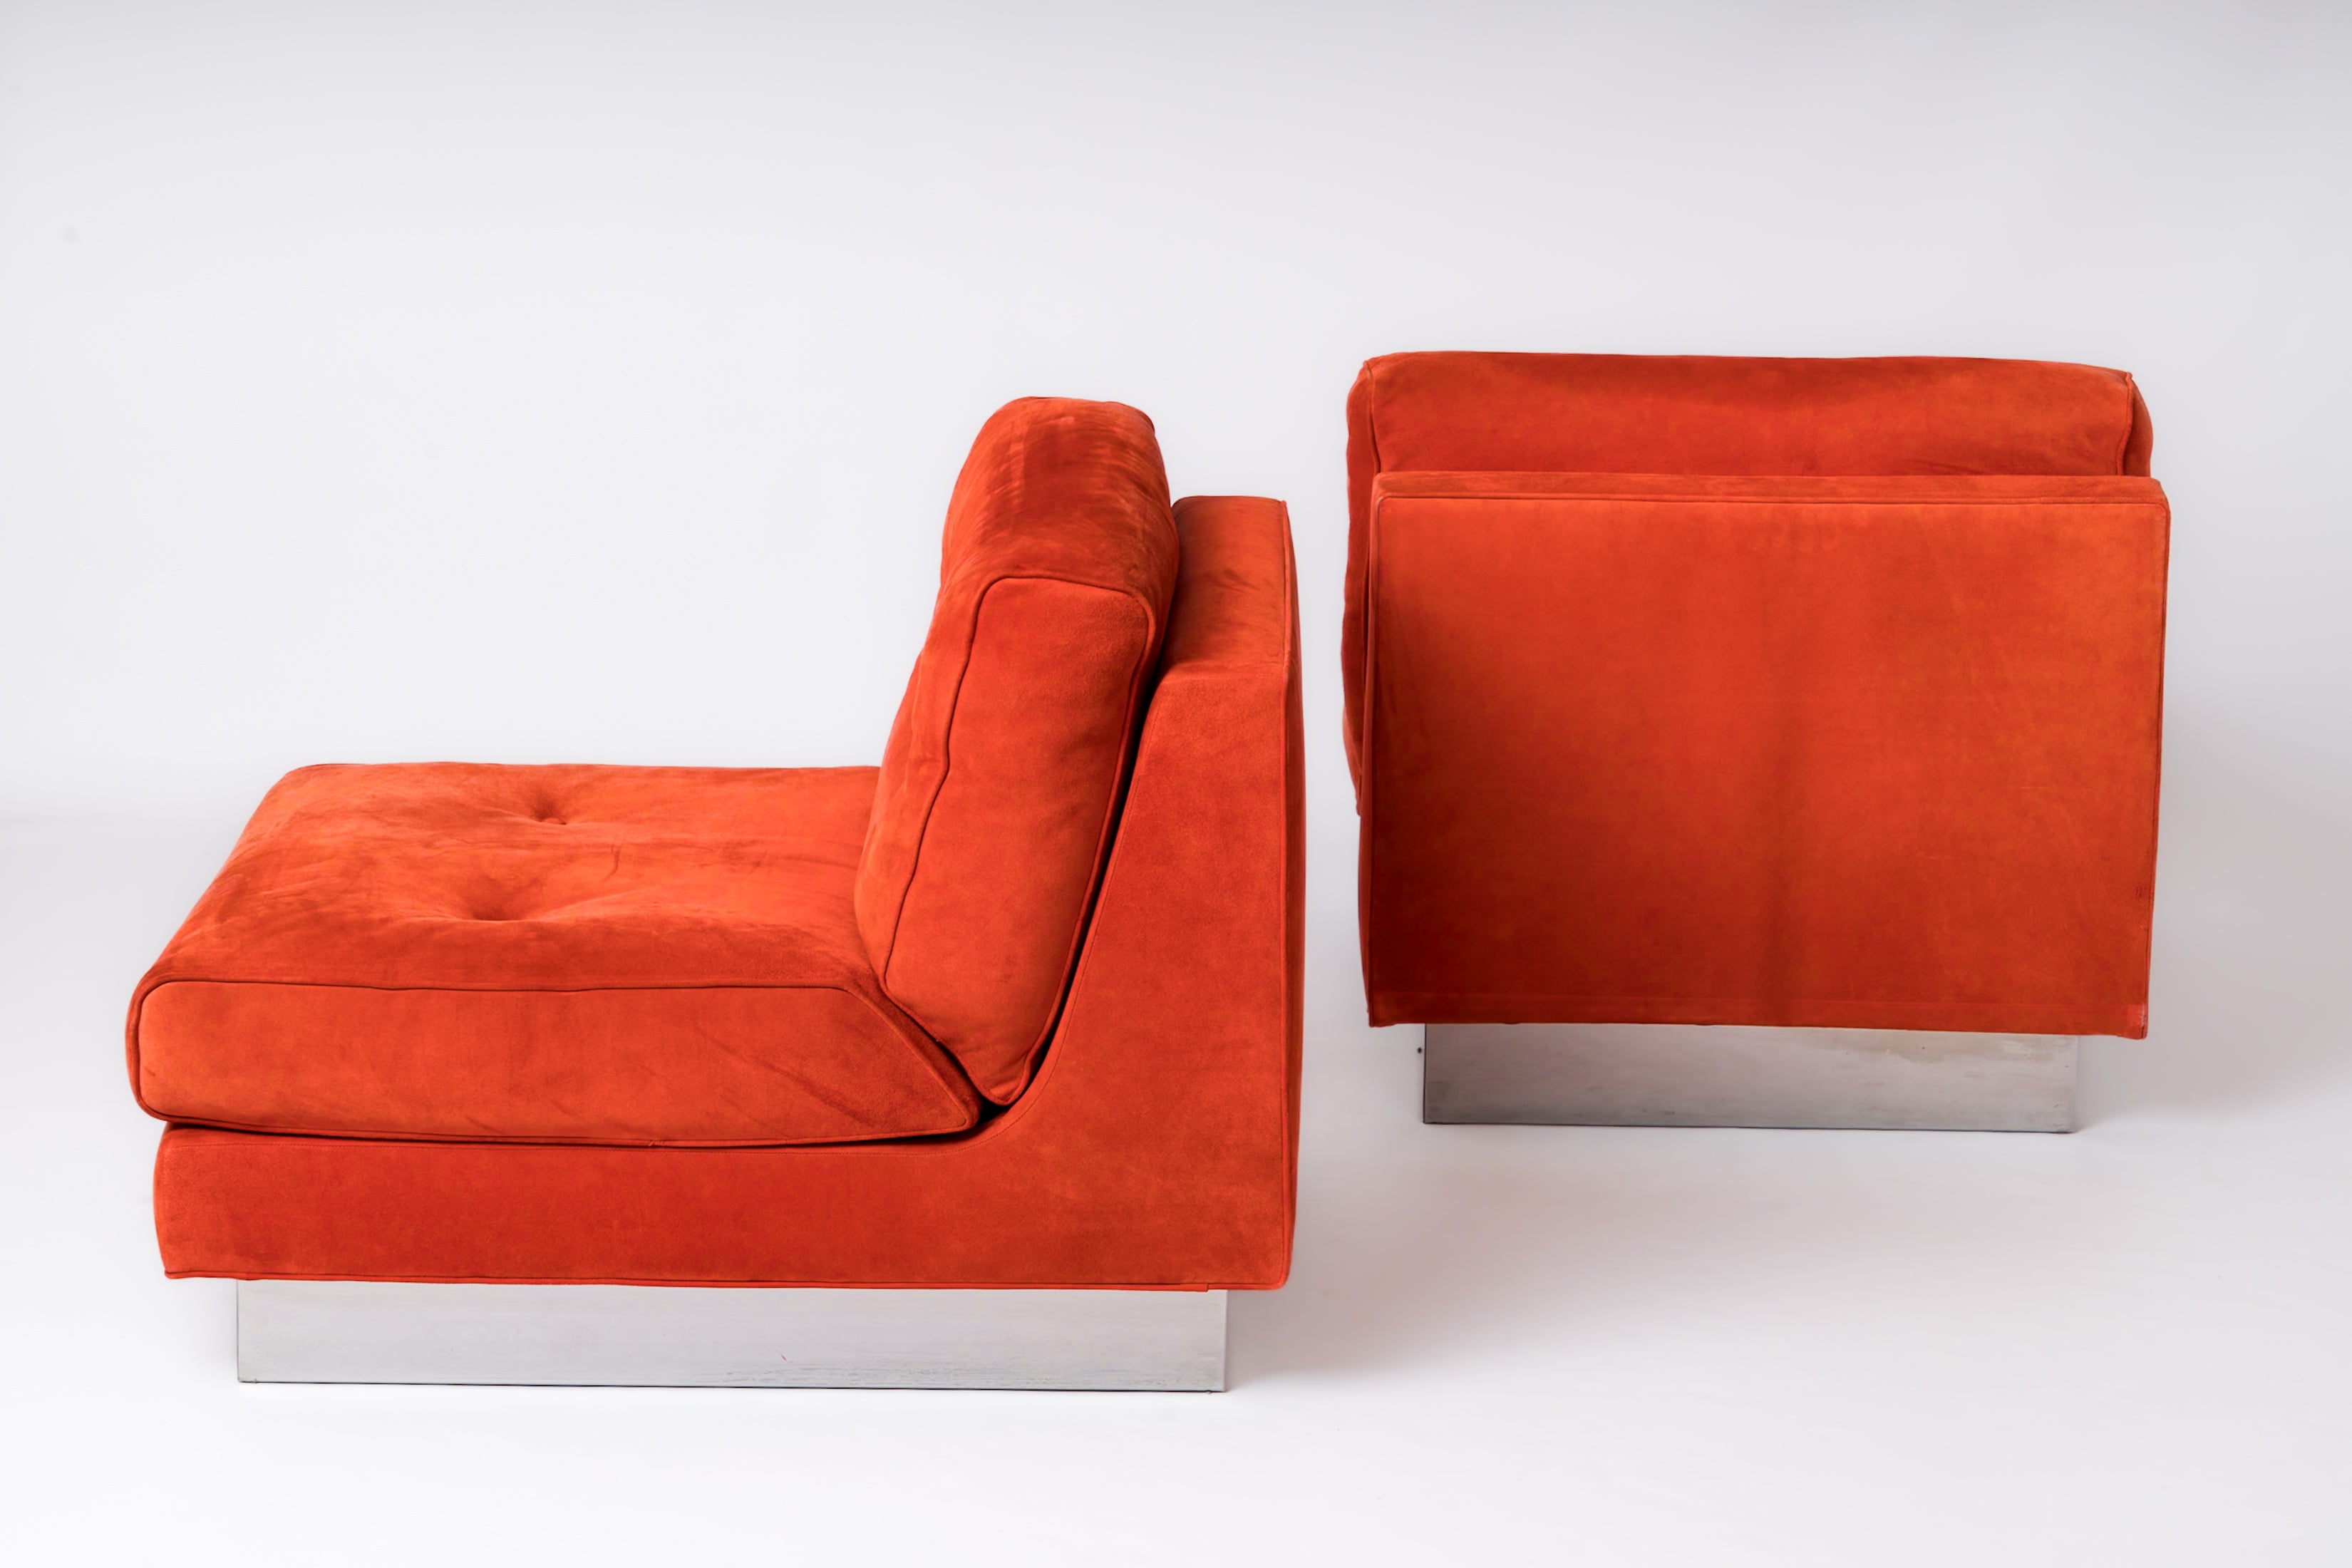 Two Blood Orange Suede "Californian" Lounge Chairs by J. Charpentier - France